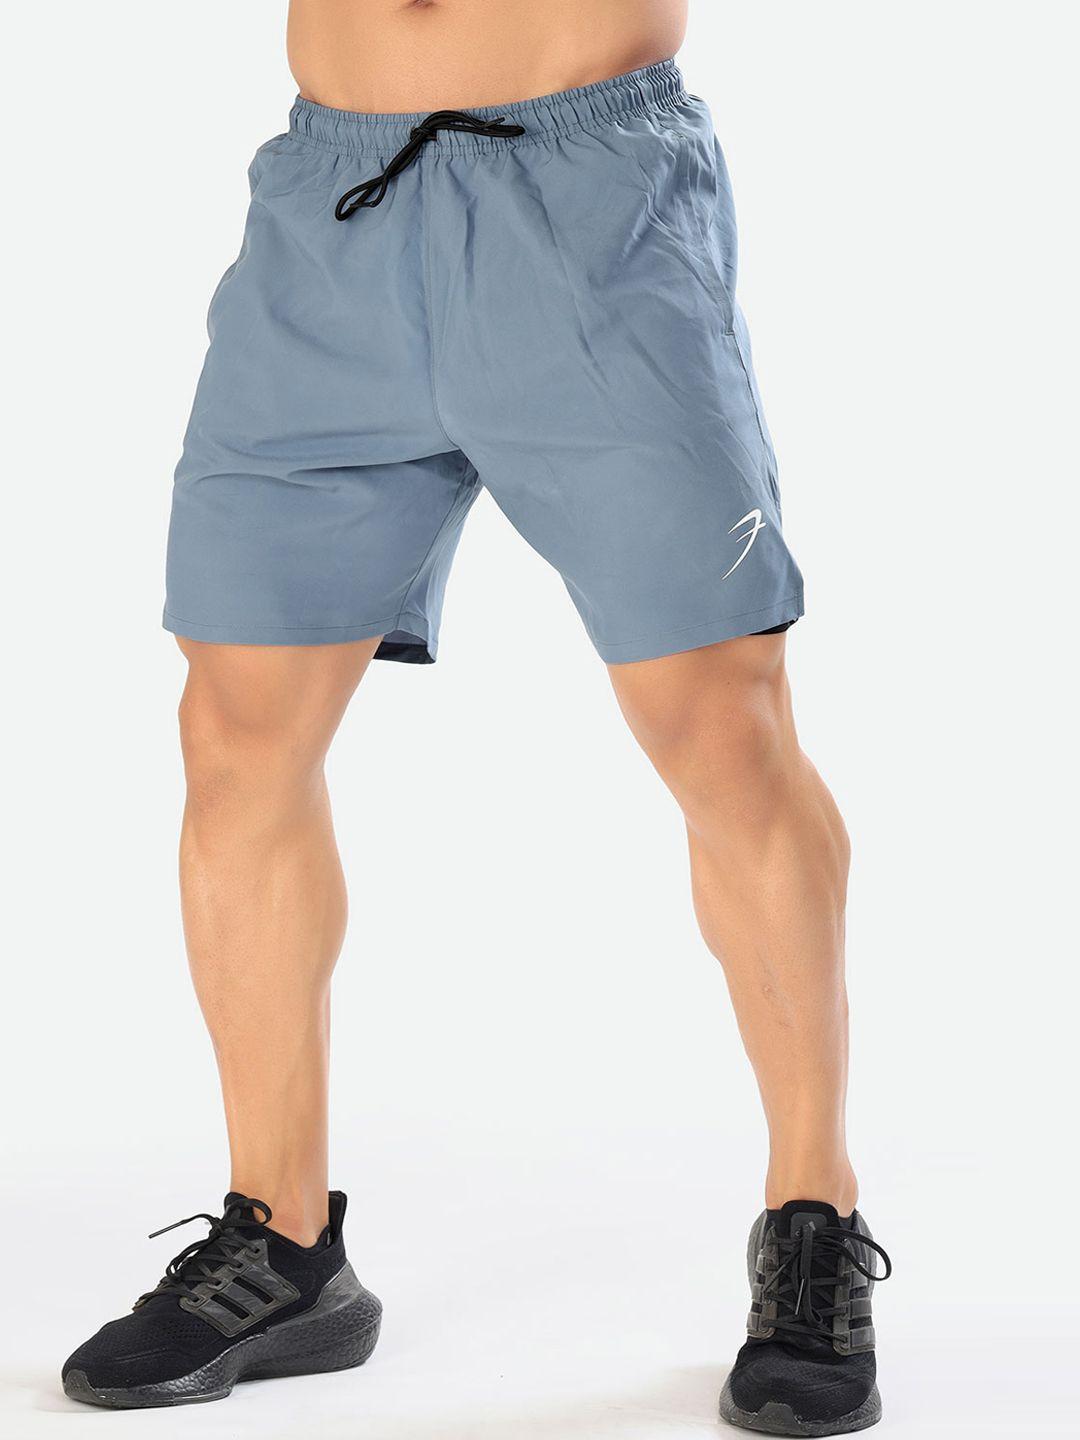 fuaark men blue skinny fit high-rise training or gym sports shorts with antimicrobial technology